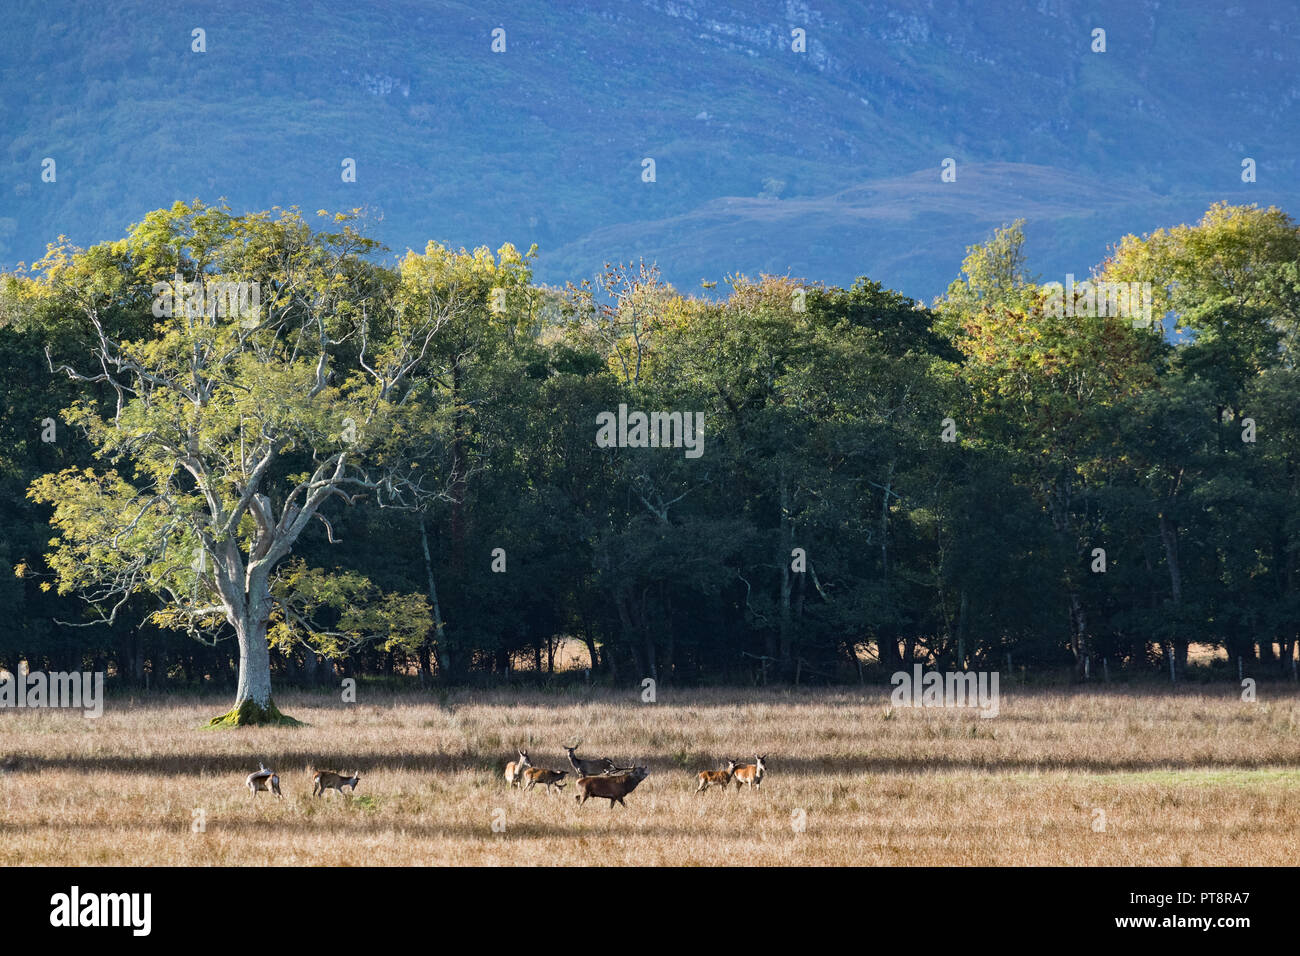 Red stag deer in Killlarney national park landscape Stock Photo